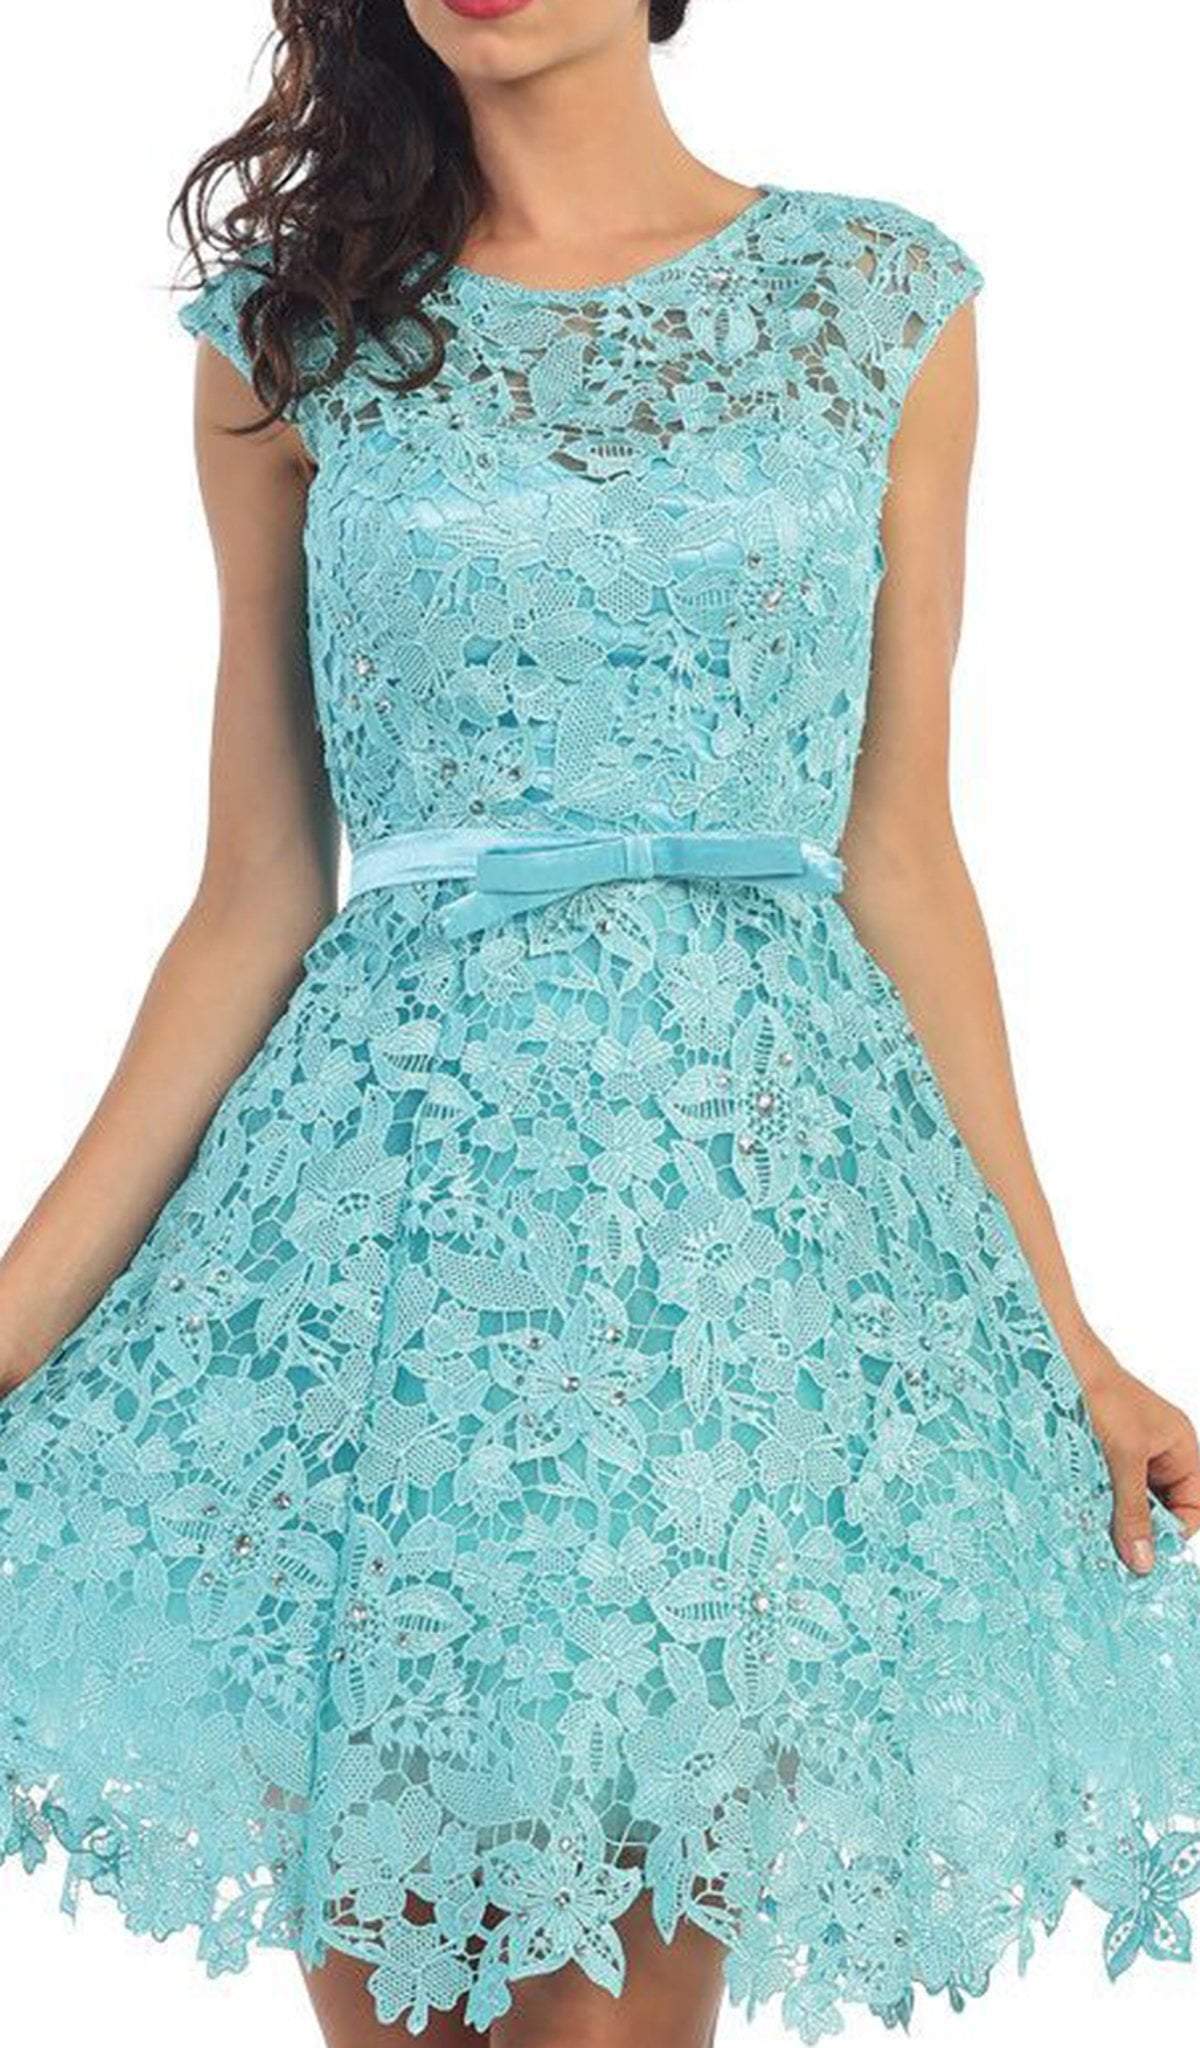 May Queen - Beaded Floral Cocktail Dress Special Occasion Dress